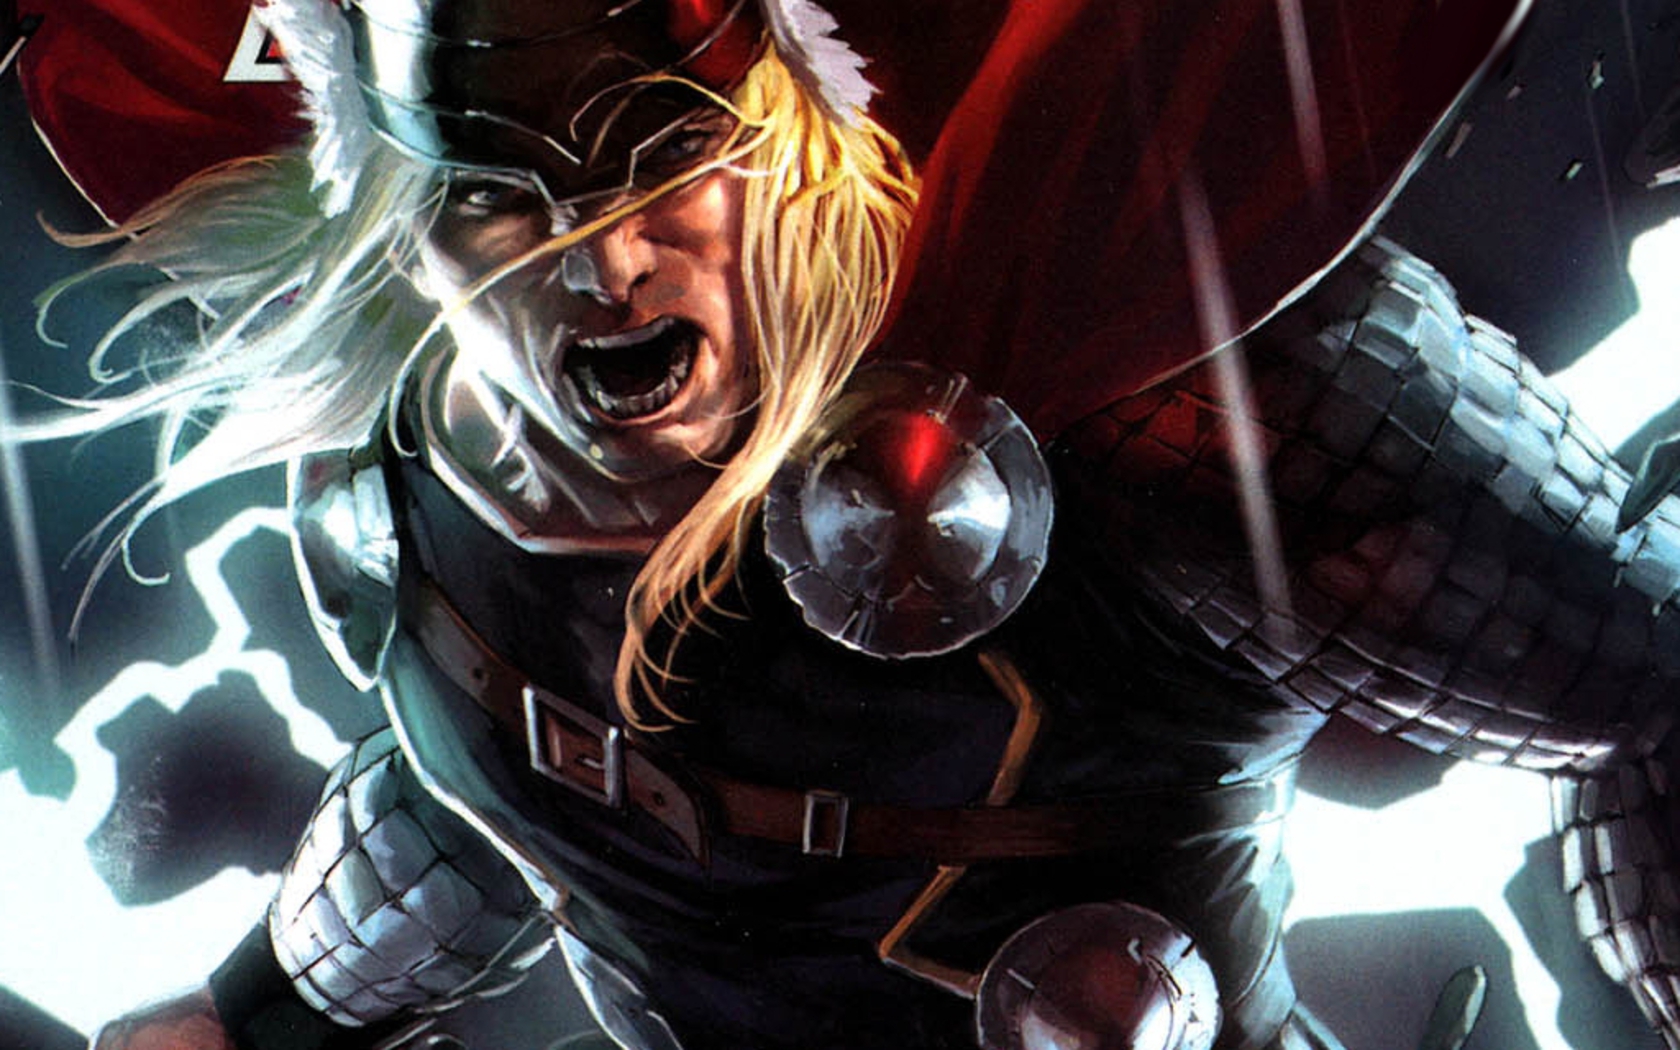 Download the Angry Thor Wallpaper, Angry Thor iPhone Wallpaper